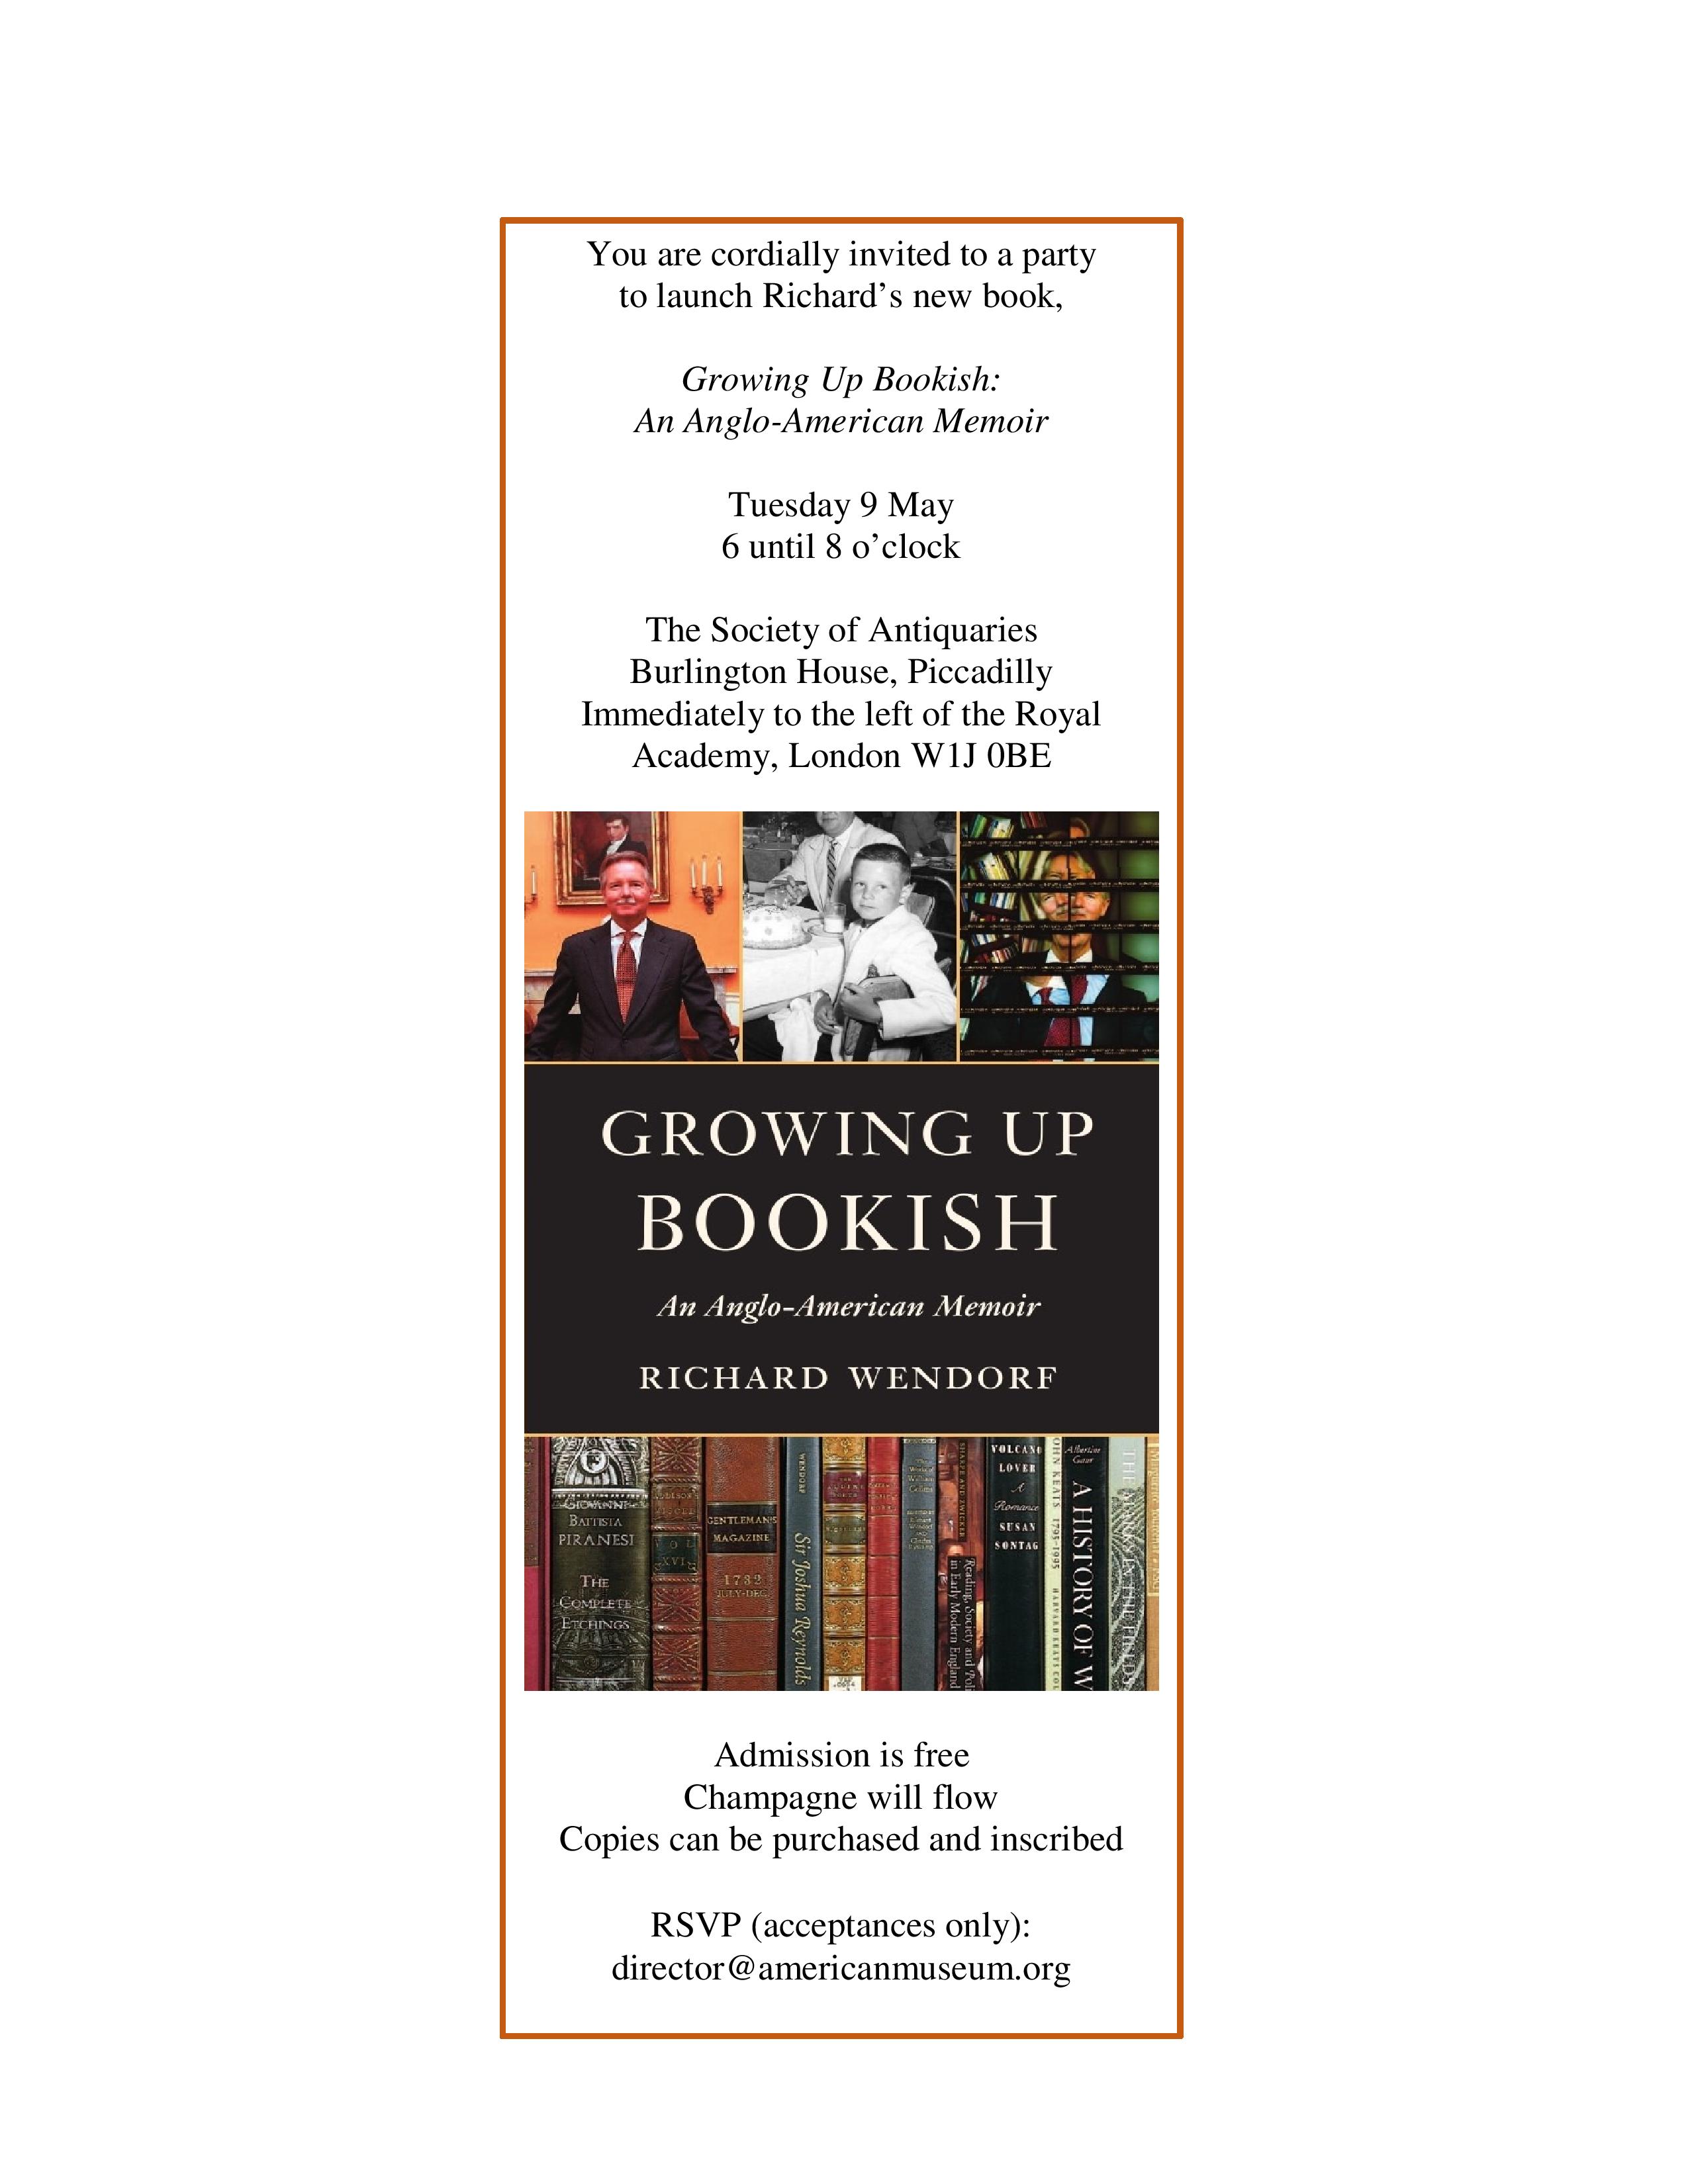 growing-up-bookish-invite-9-may-2017-page-001